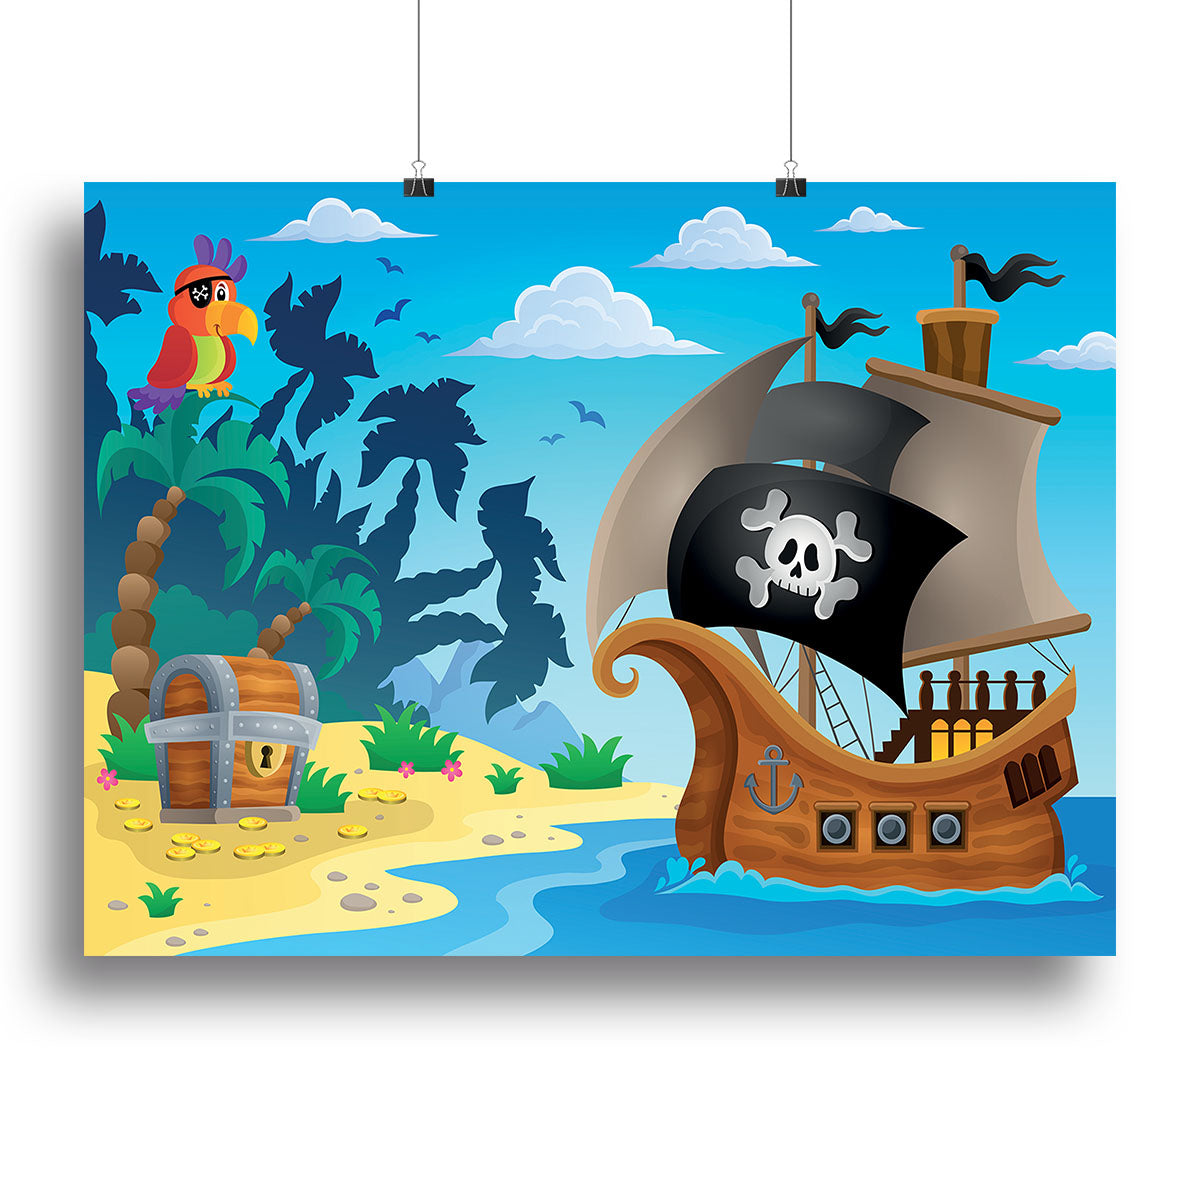 Pirate ship topic image 5 Canvas Print or Poster - Canvas Art Rocks - 2